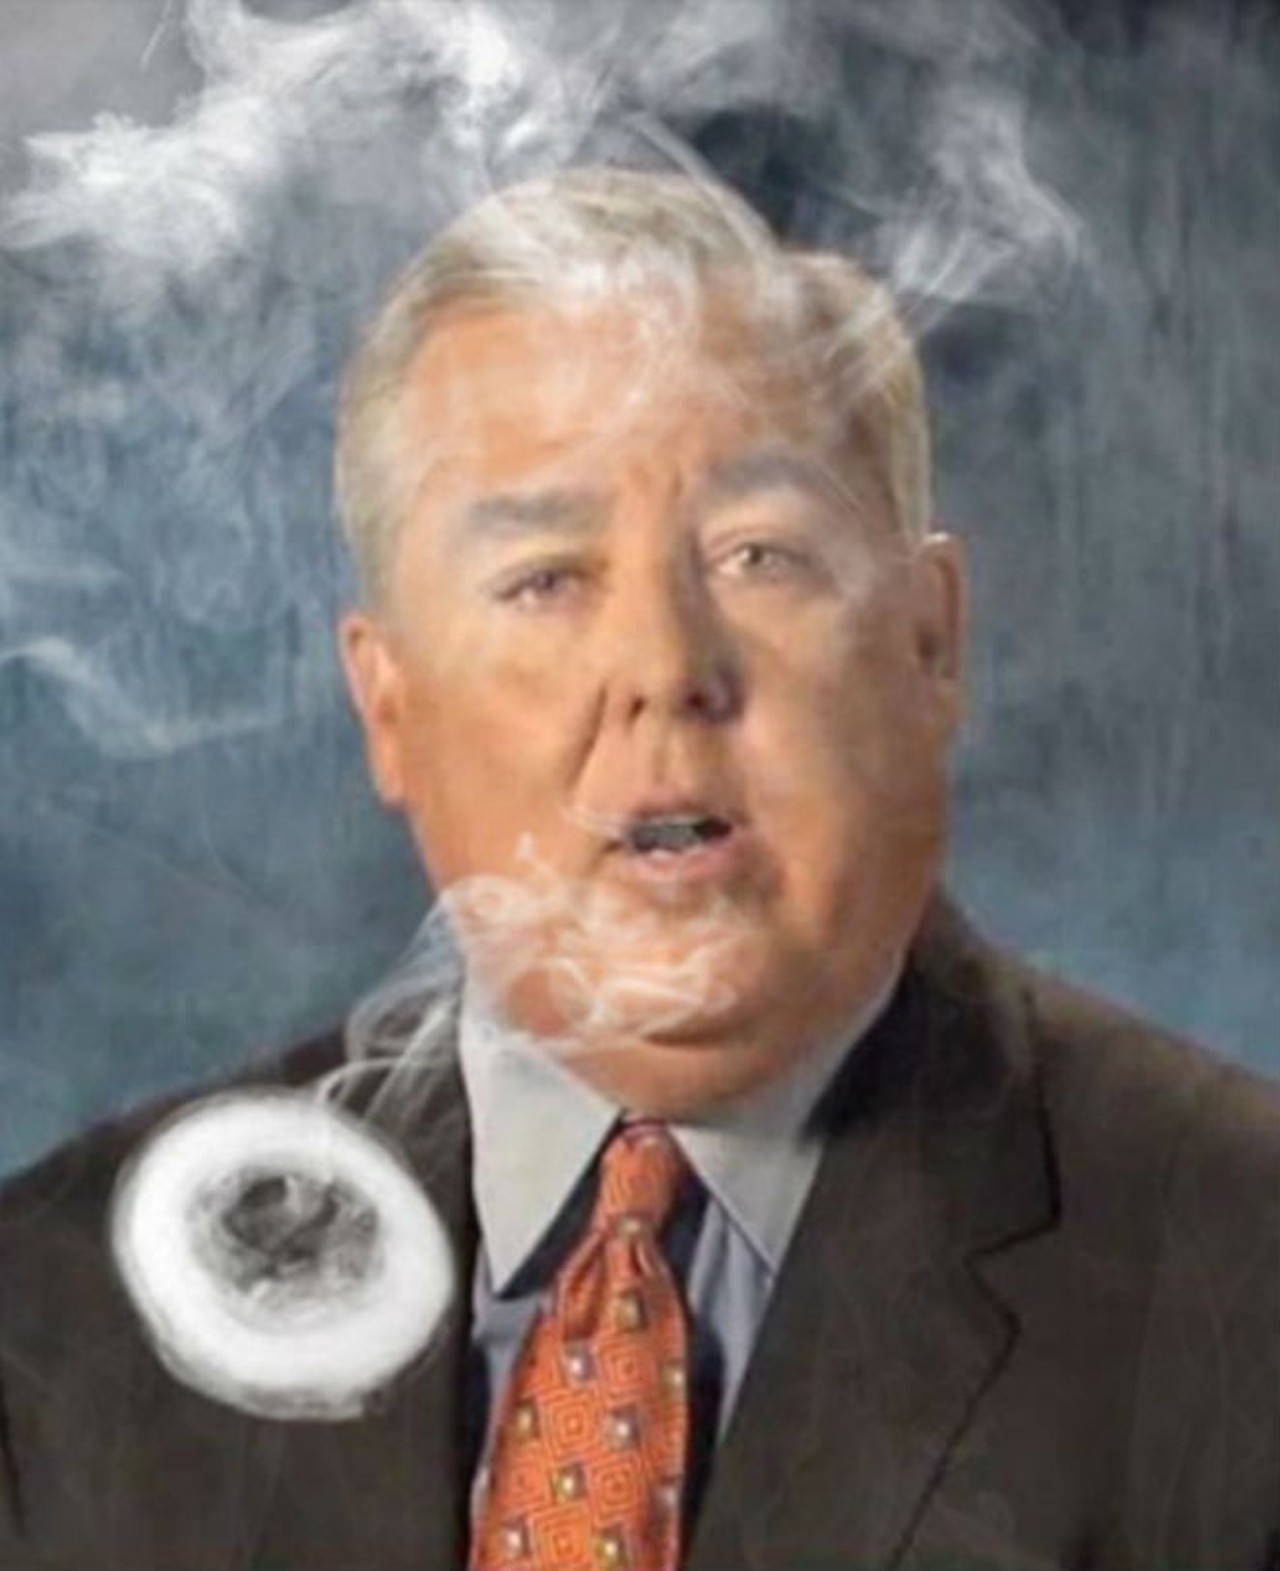 Stoner John Morgan
Imagine you're dressed as local attorney and medical marijuana advocate John Morgan and you walk up to a crowd of people at a party:
"So, ya'll smoke weed? John Morgan gonna shotgun this weed directly into your mouth. "
*Blows weed directly in someone's face* 
"John Morgan, for the people."